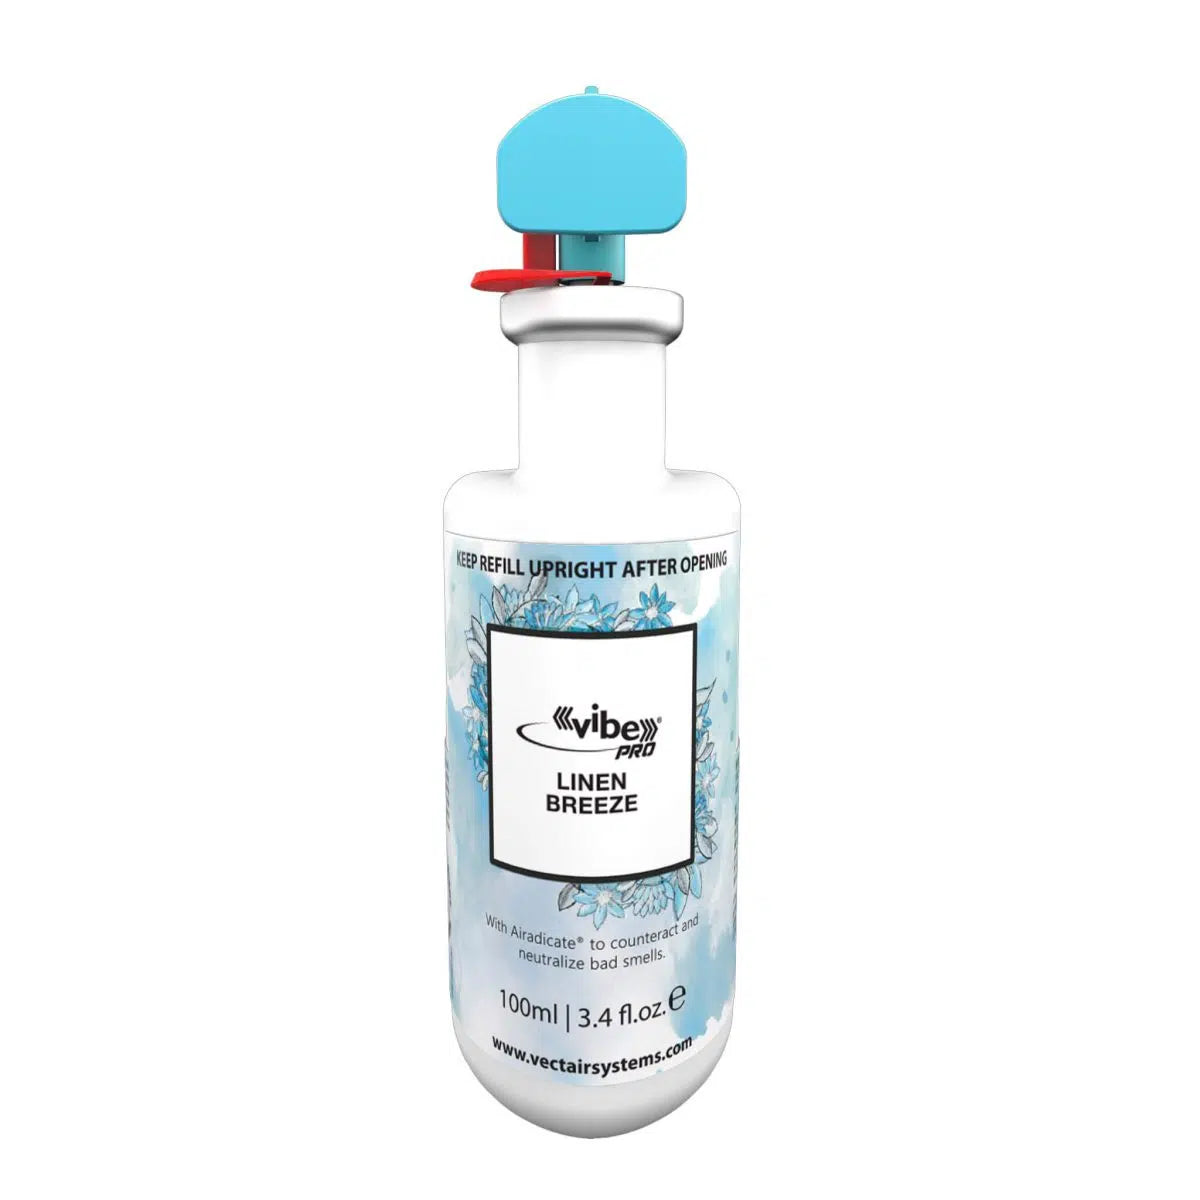 The Linen Breeze fragrance consists of a fresh and lively fragrance, breezing into your surroundings to produce a hit of clean linen, creating a relaxing and uplifting atmosphere.